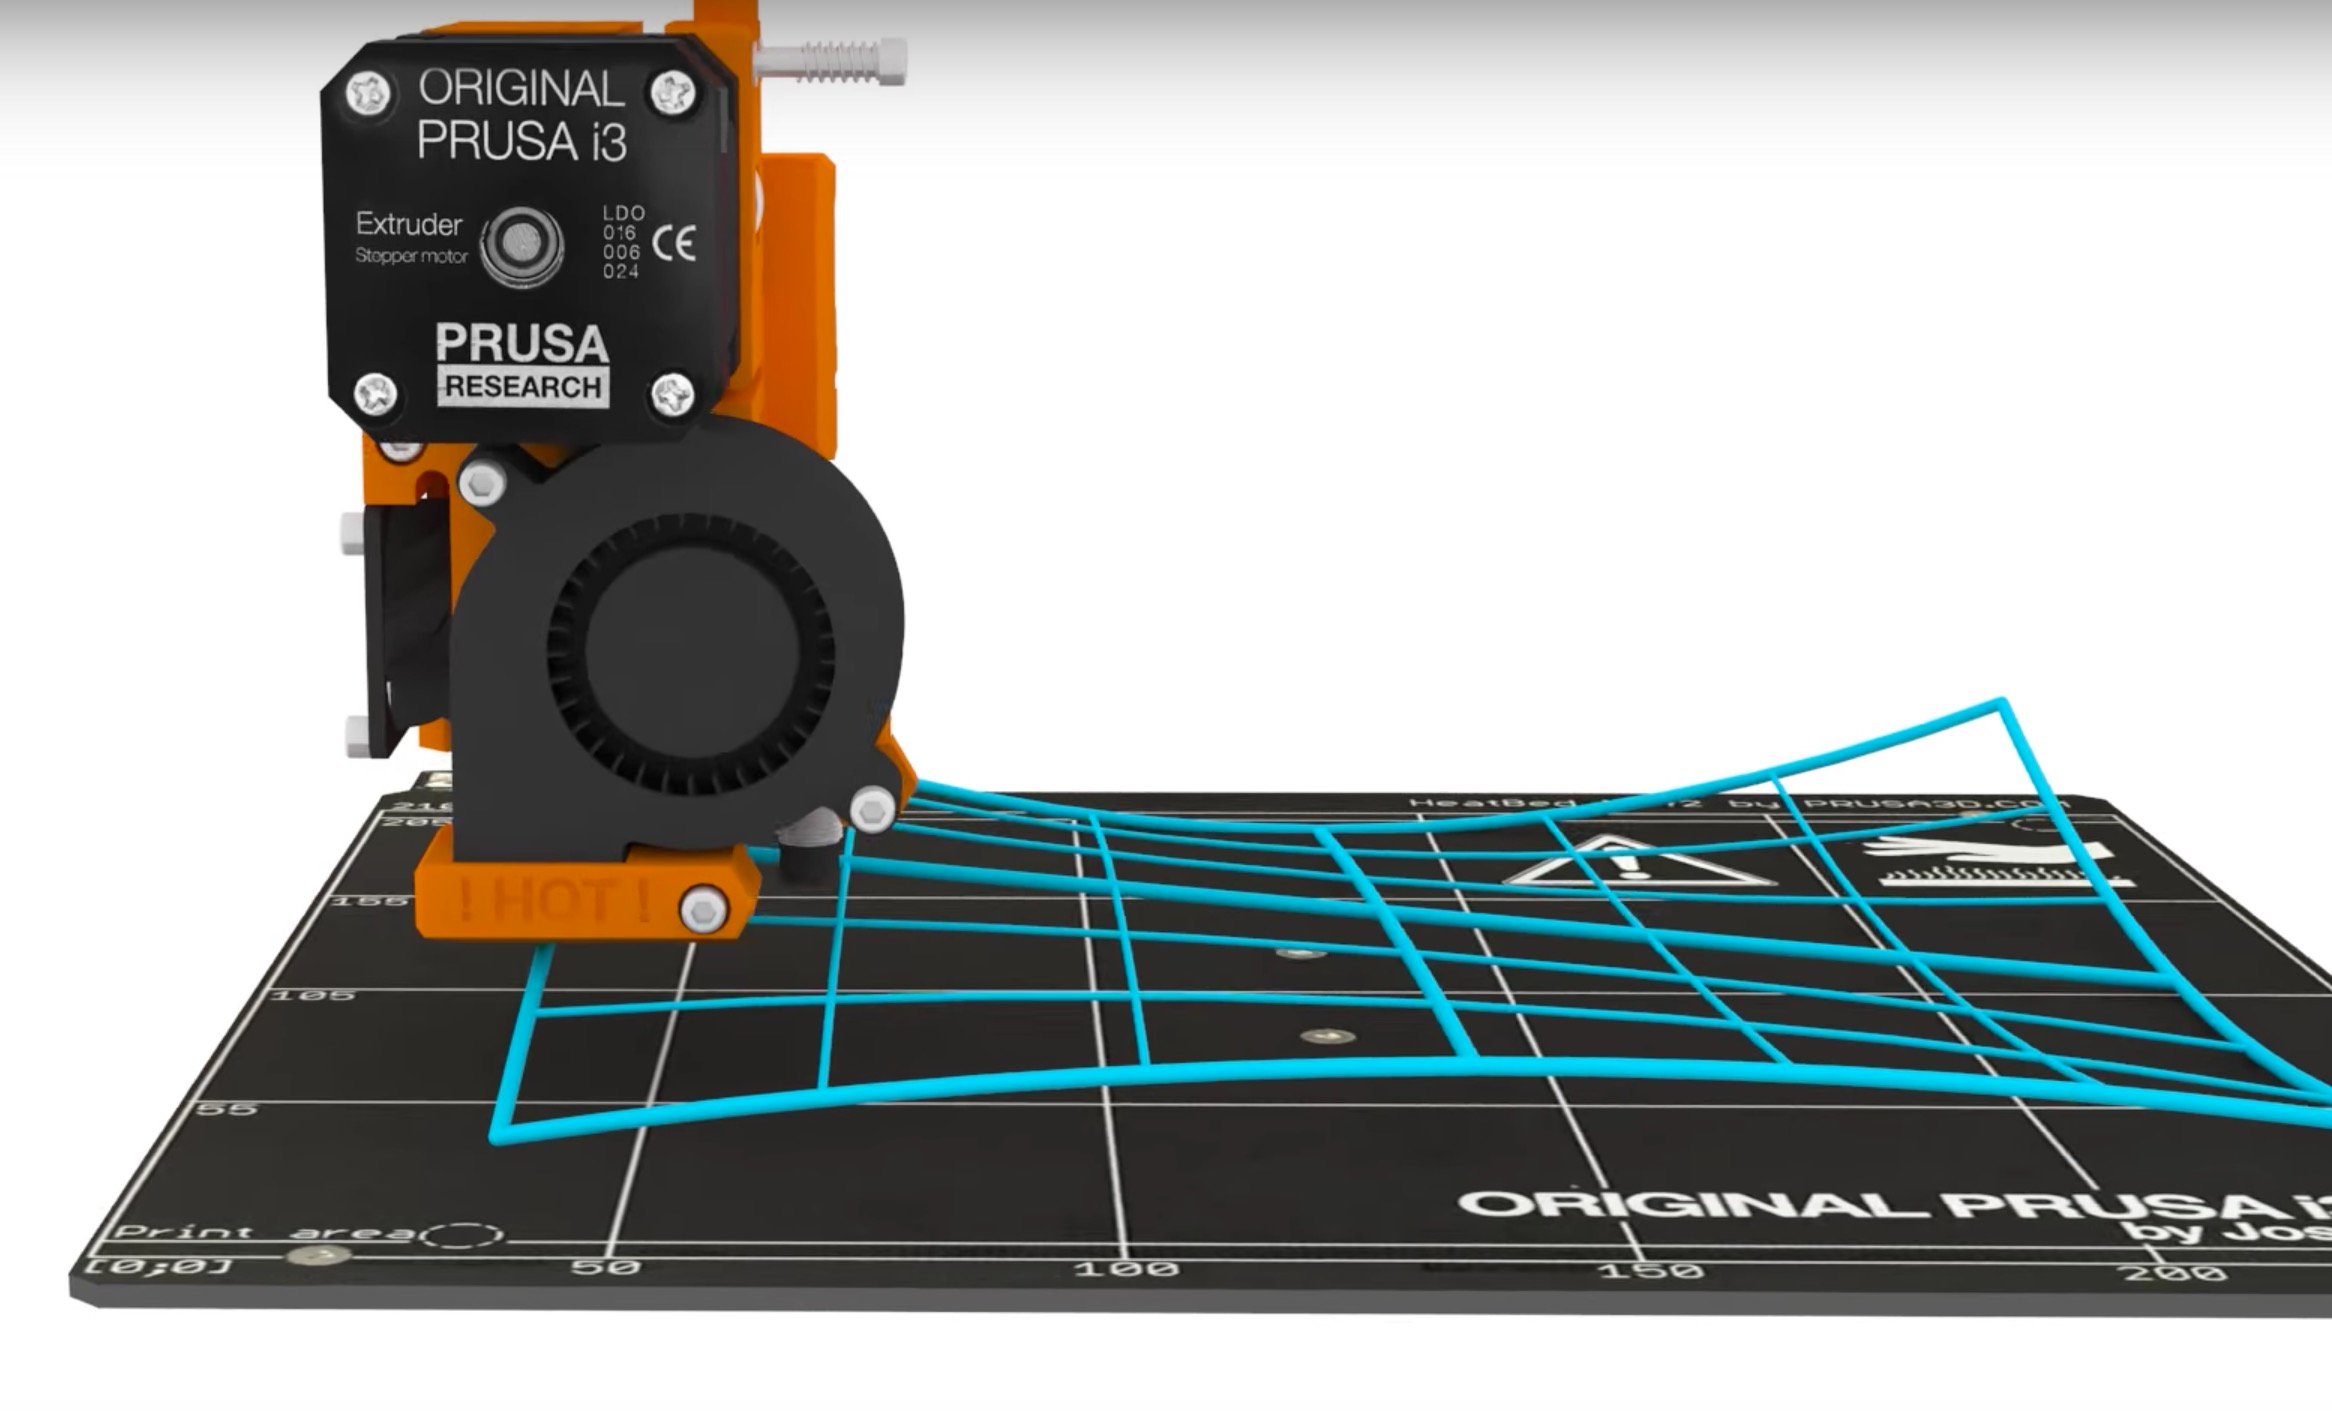  A graphic showing how the Prusa i3 MK2's auto calibration system handles non-flat print surfaces 